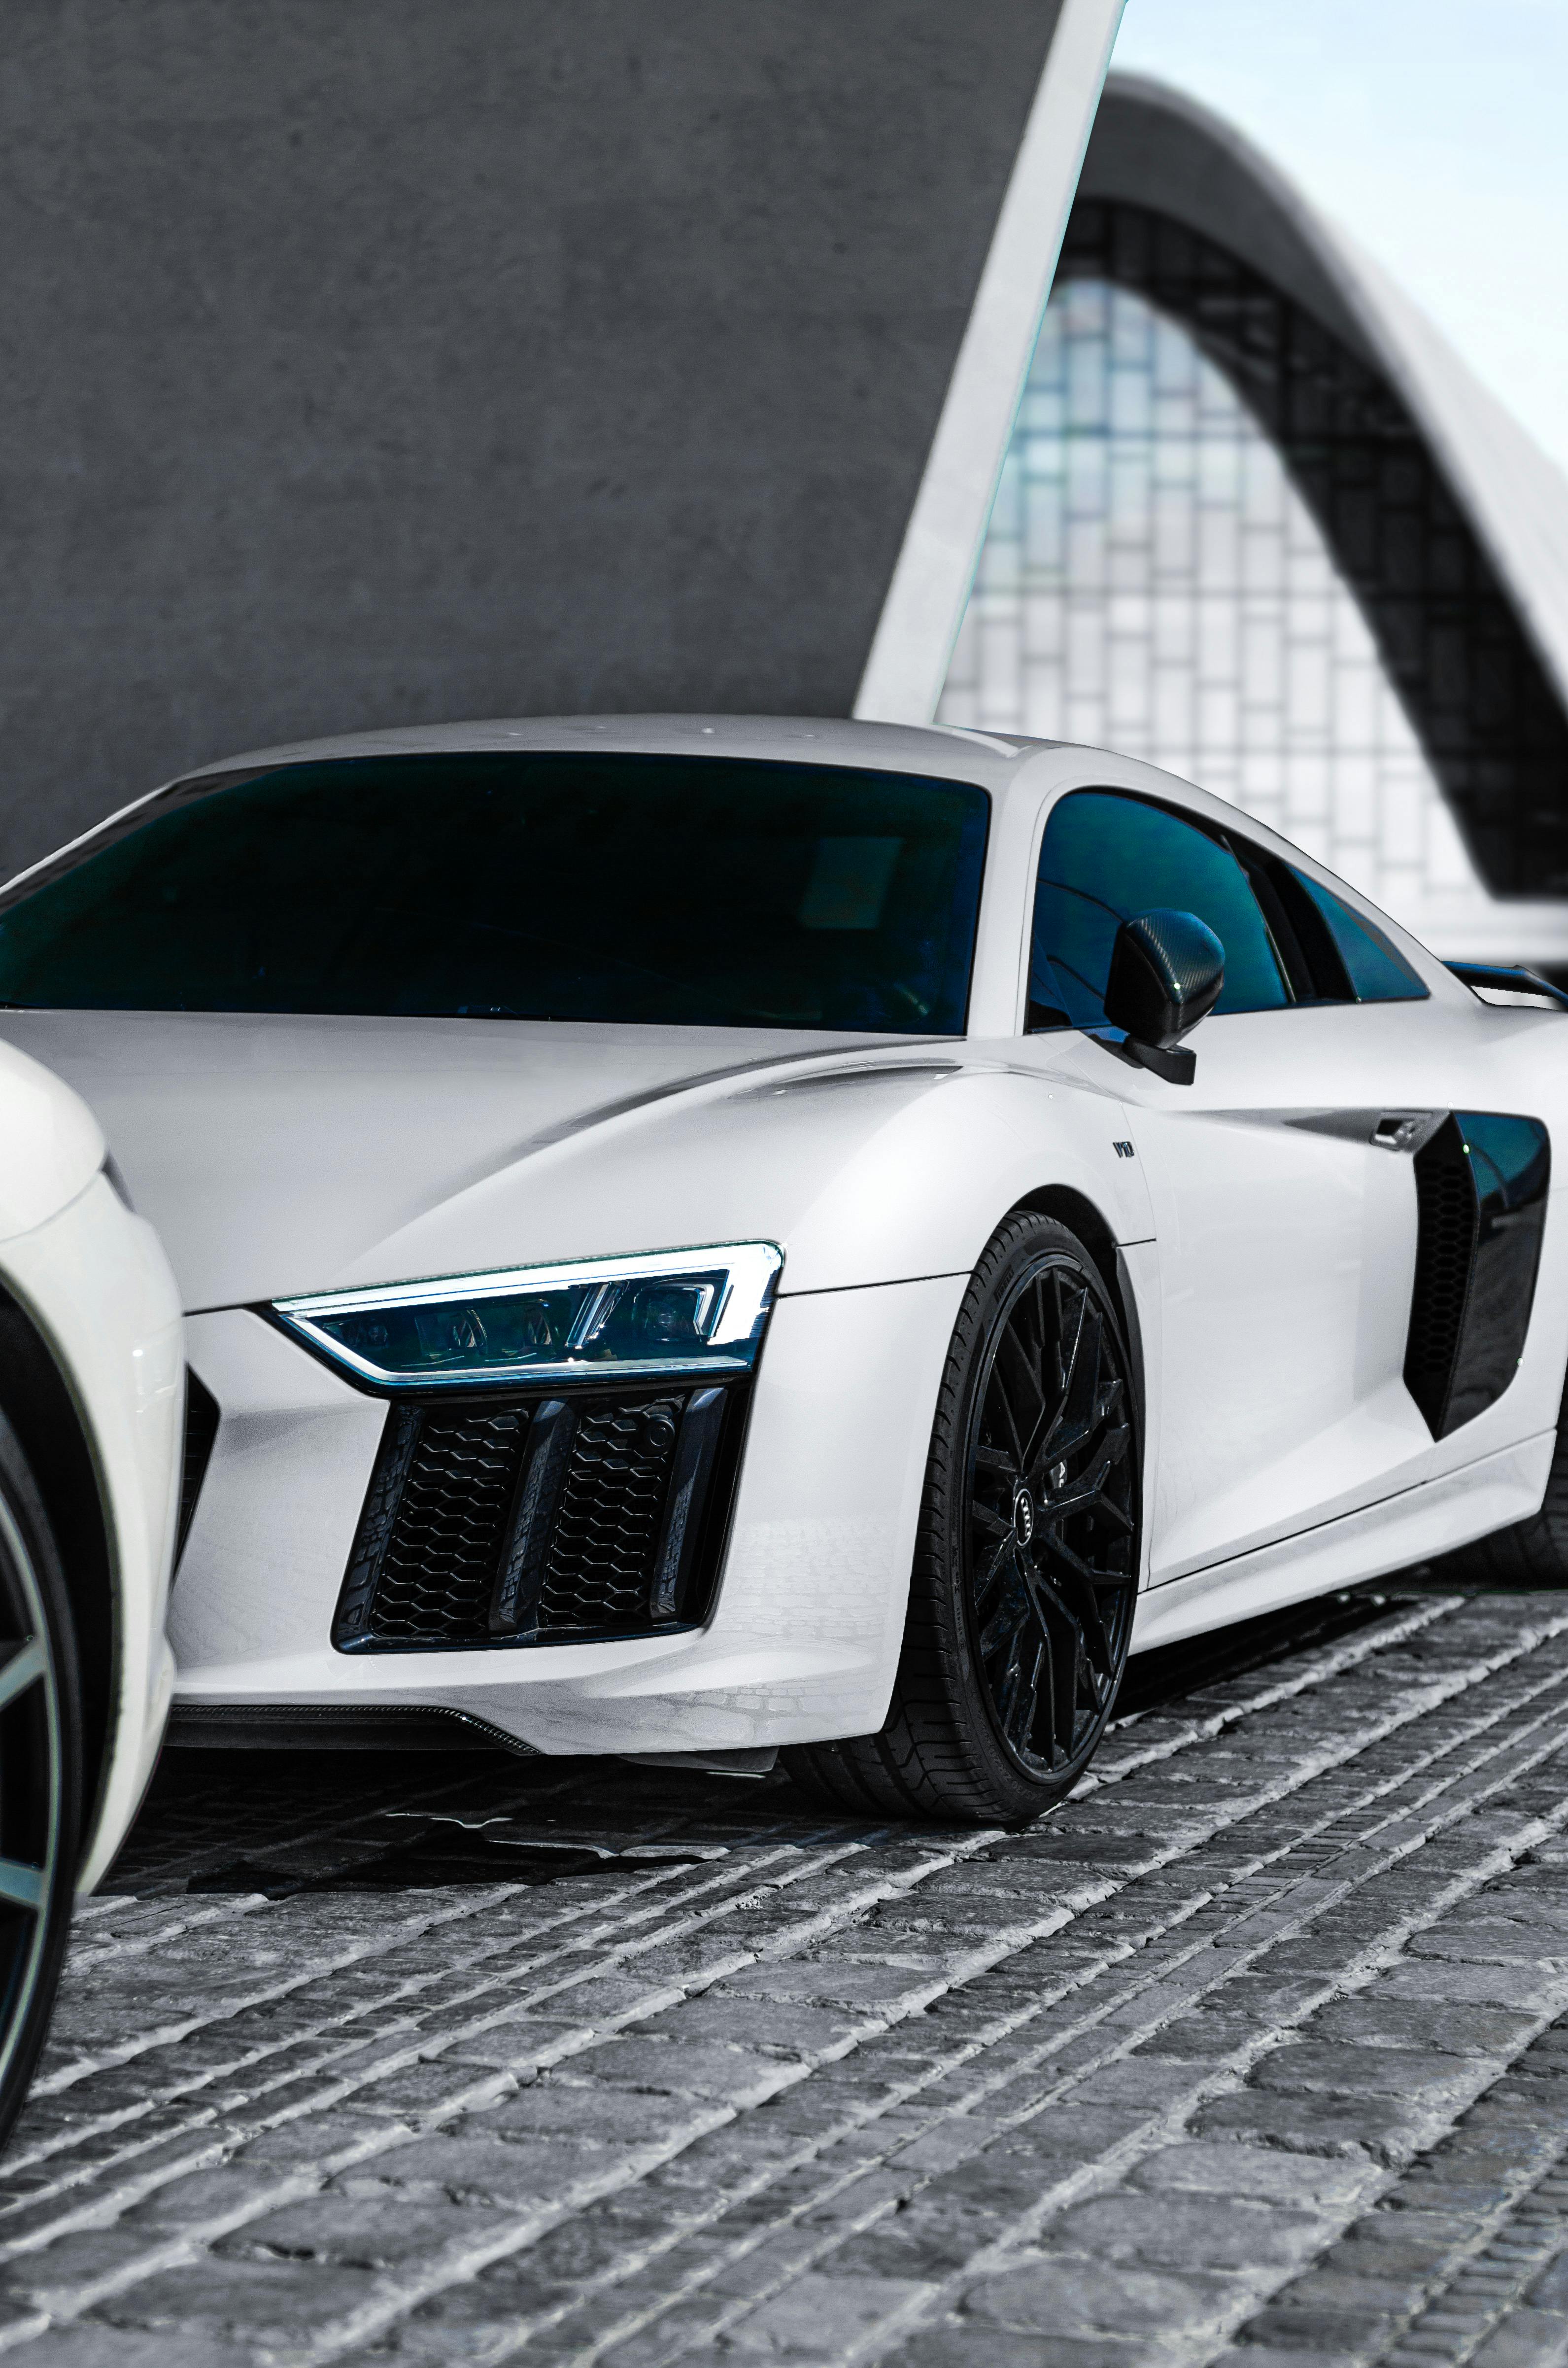 Your Ridiculously Awesome Audi R8 Wallpaper Is Here  Audi r8 wallpaper Audi  r8 Black audi